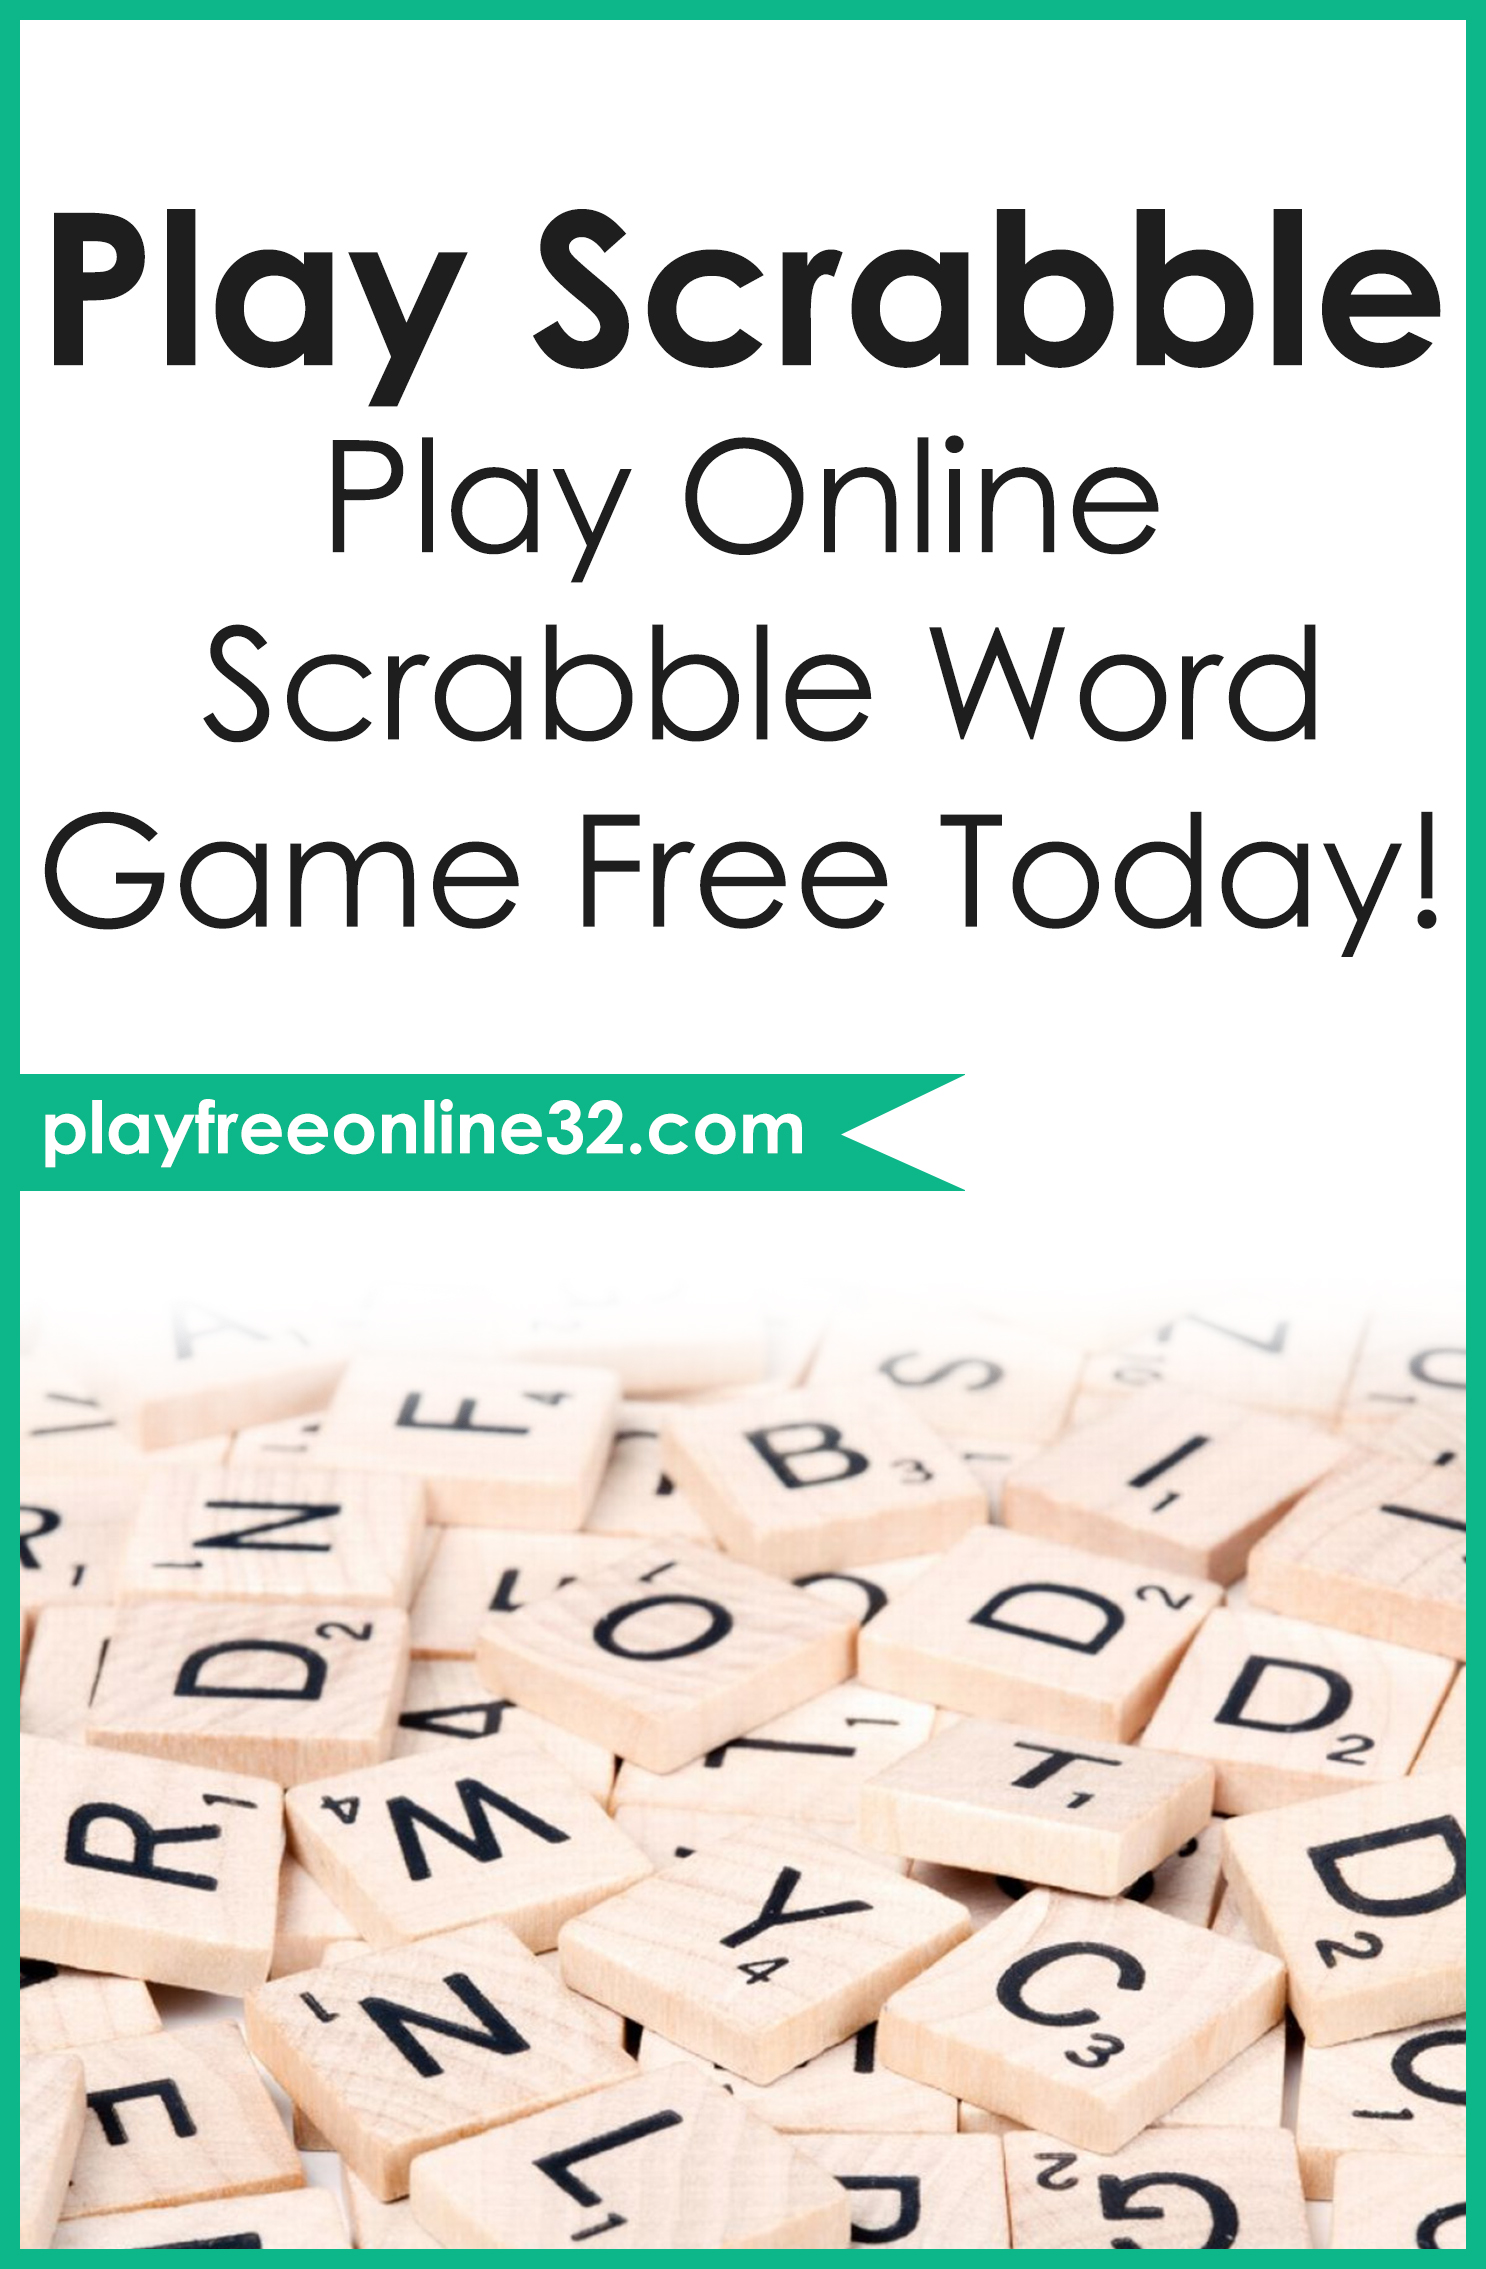 Scrabble Online Play Scramble Word Finder Game For Free